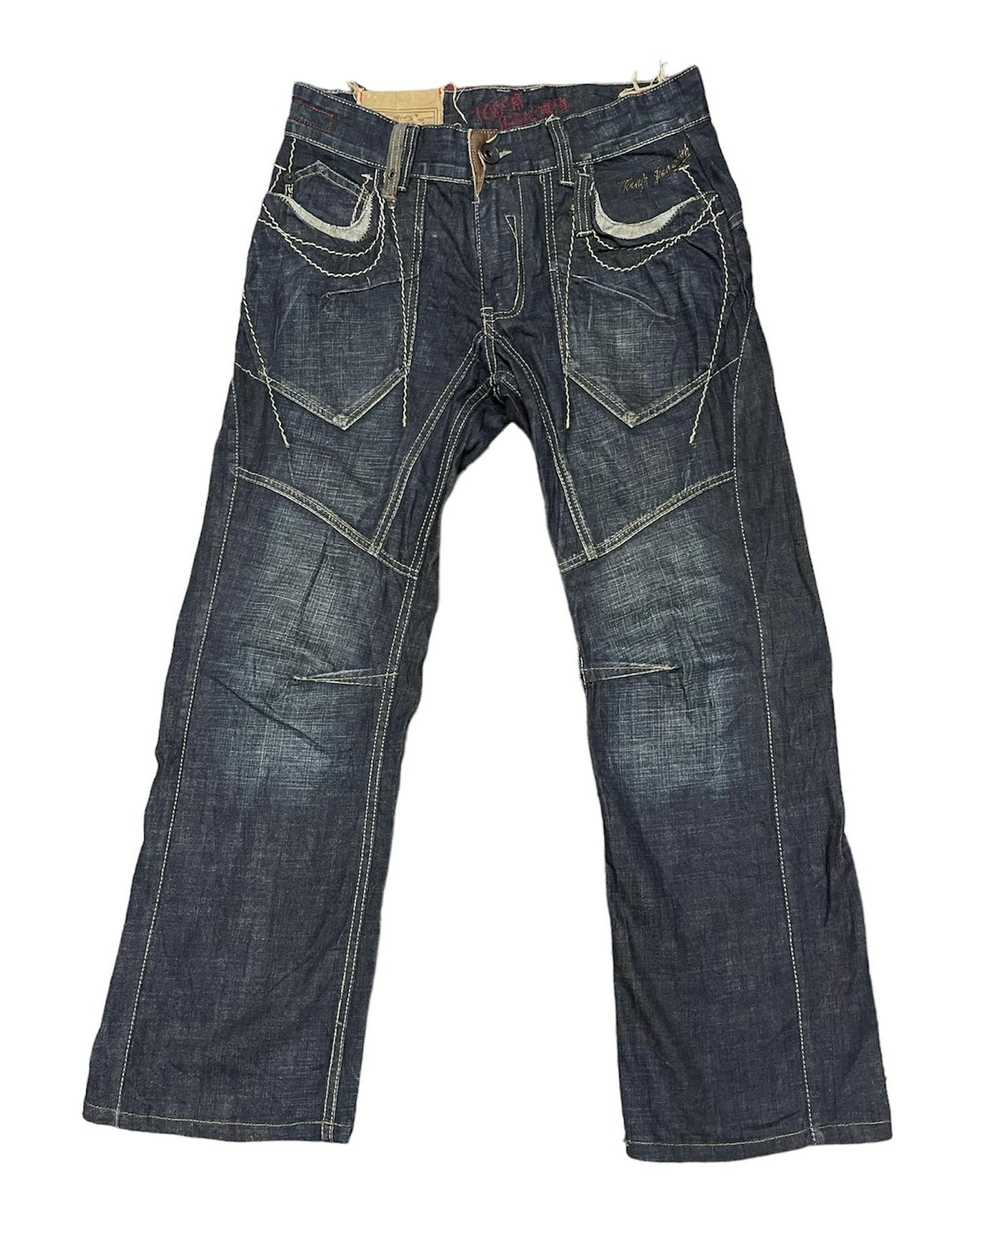 Japanese Brand Tough jeansmith jeans - image 1